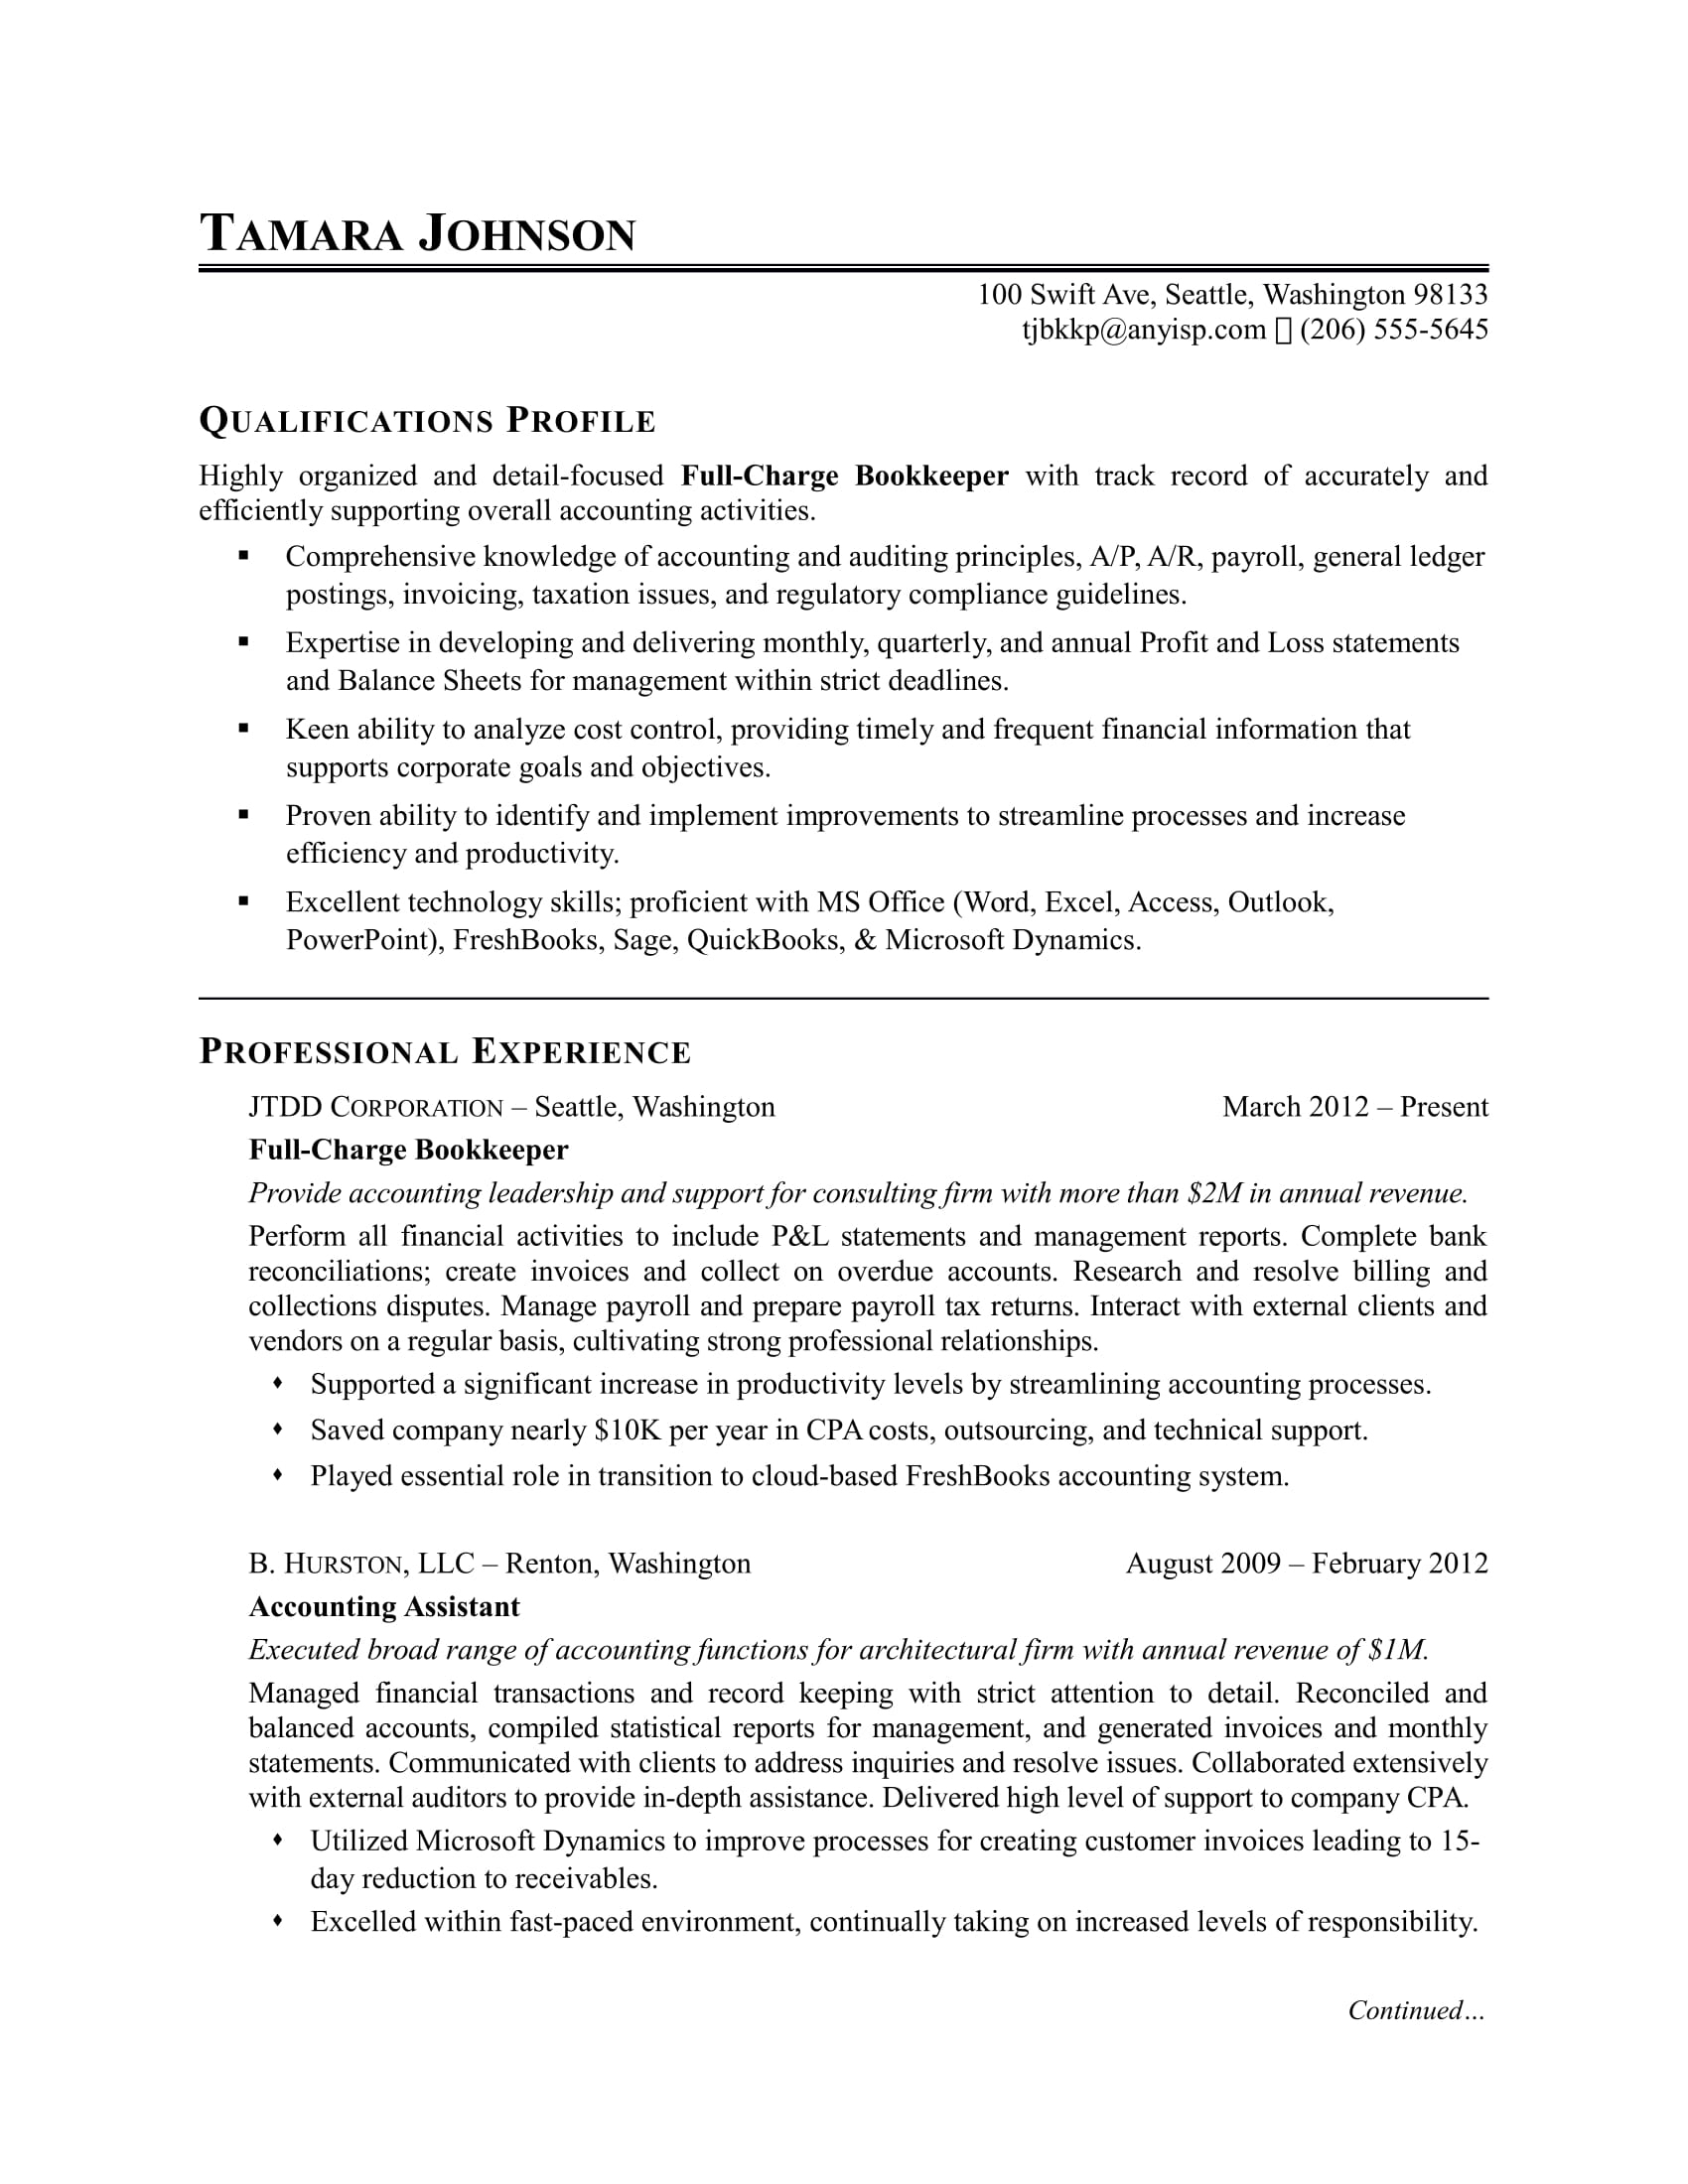 Bookkeeper Resume Sample | Monster Within Bookkeeping Resume Template